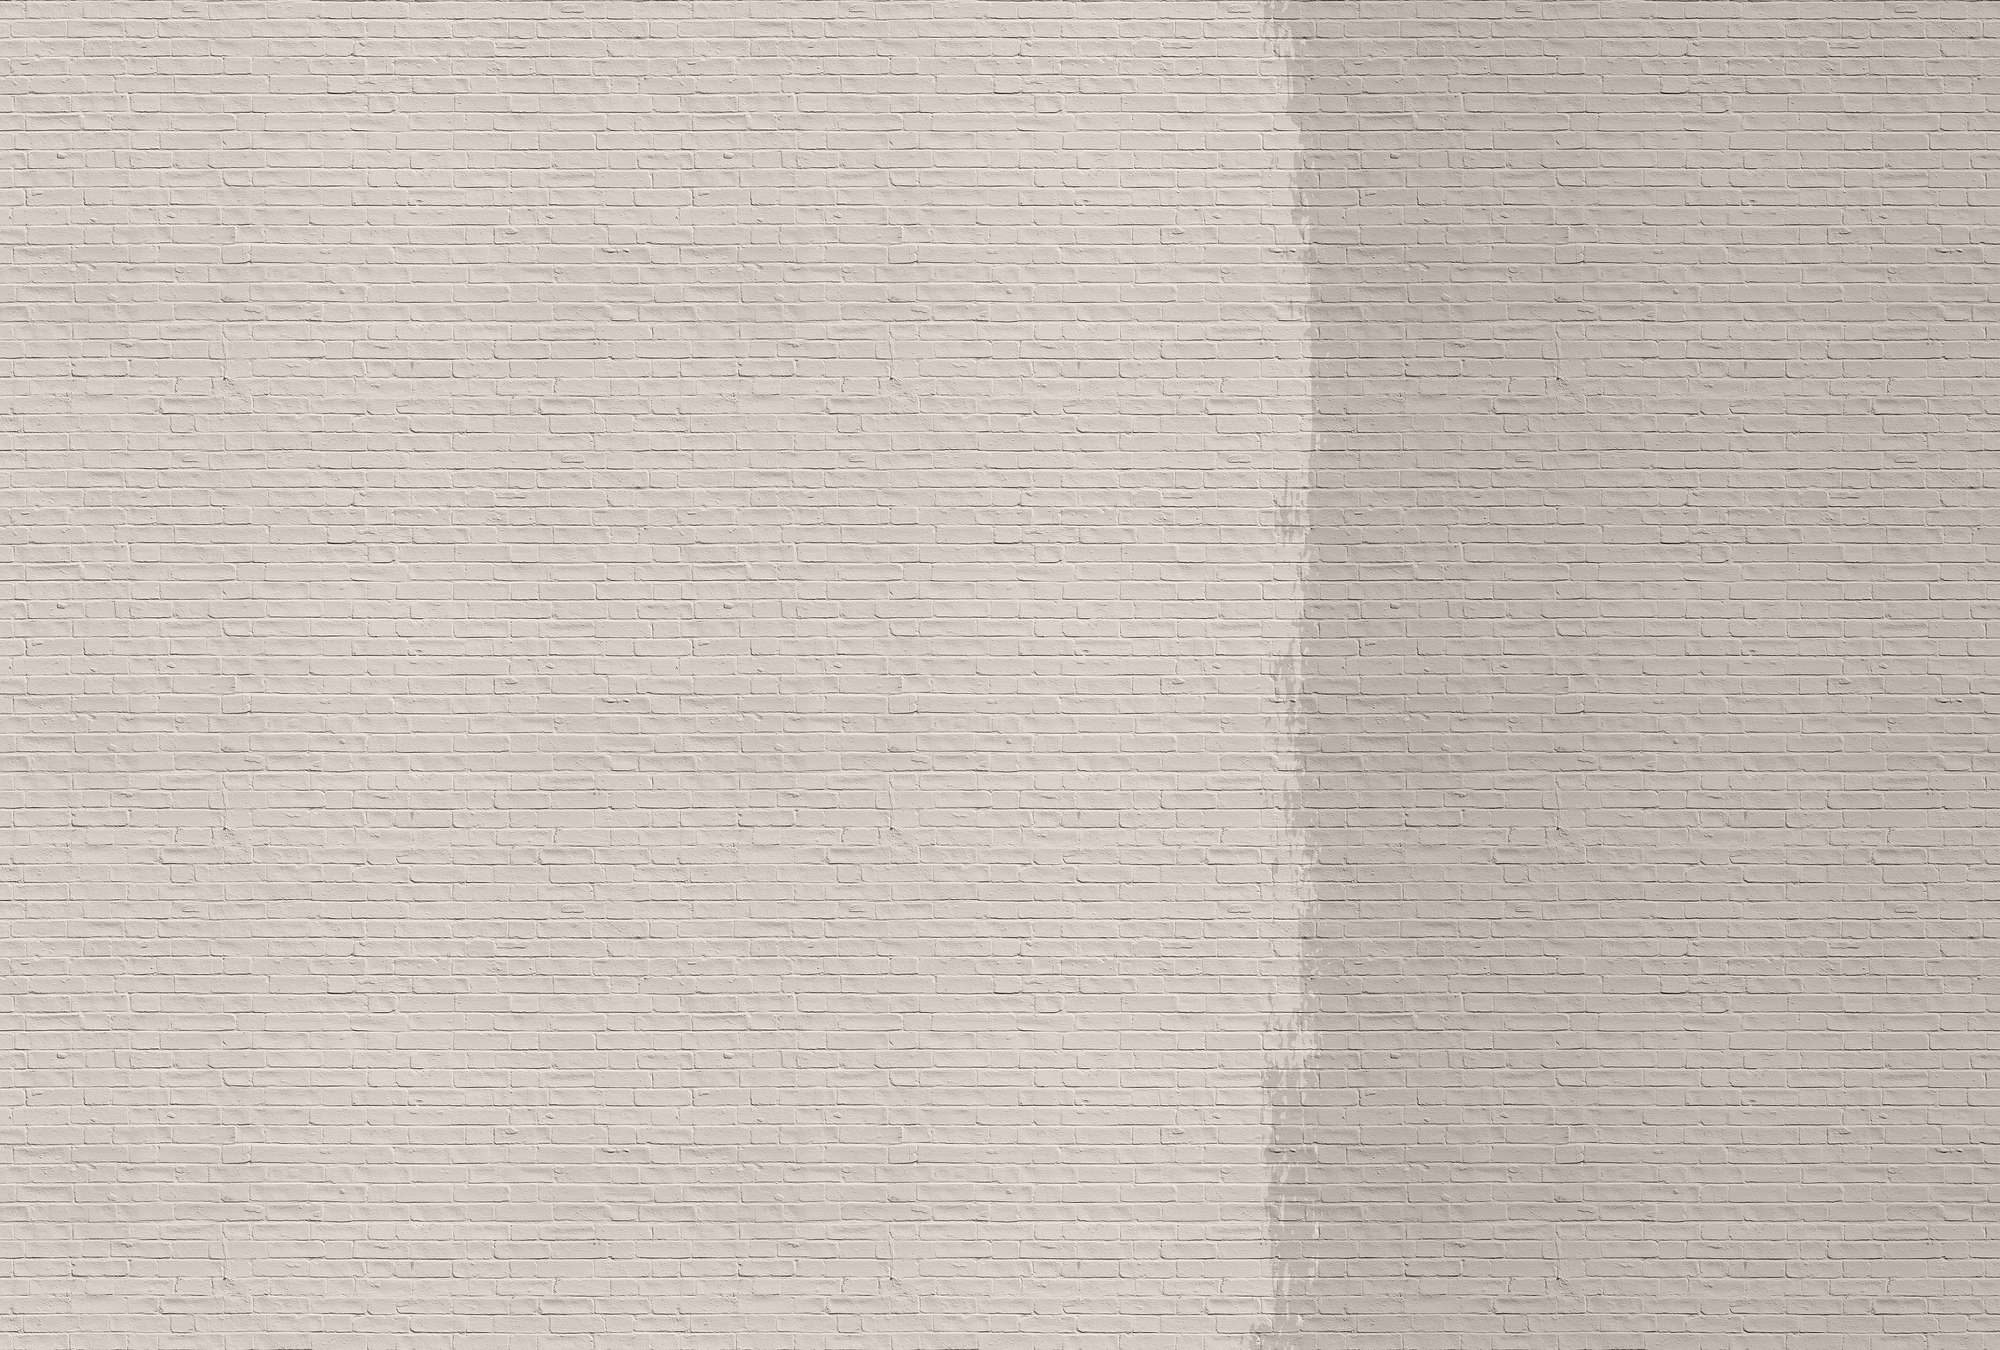             Tainted love 1 - Brick wall mural painted - Beige, Taupe | Premium smooth fleece
        